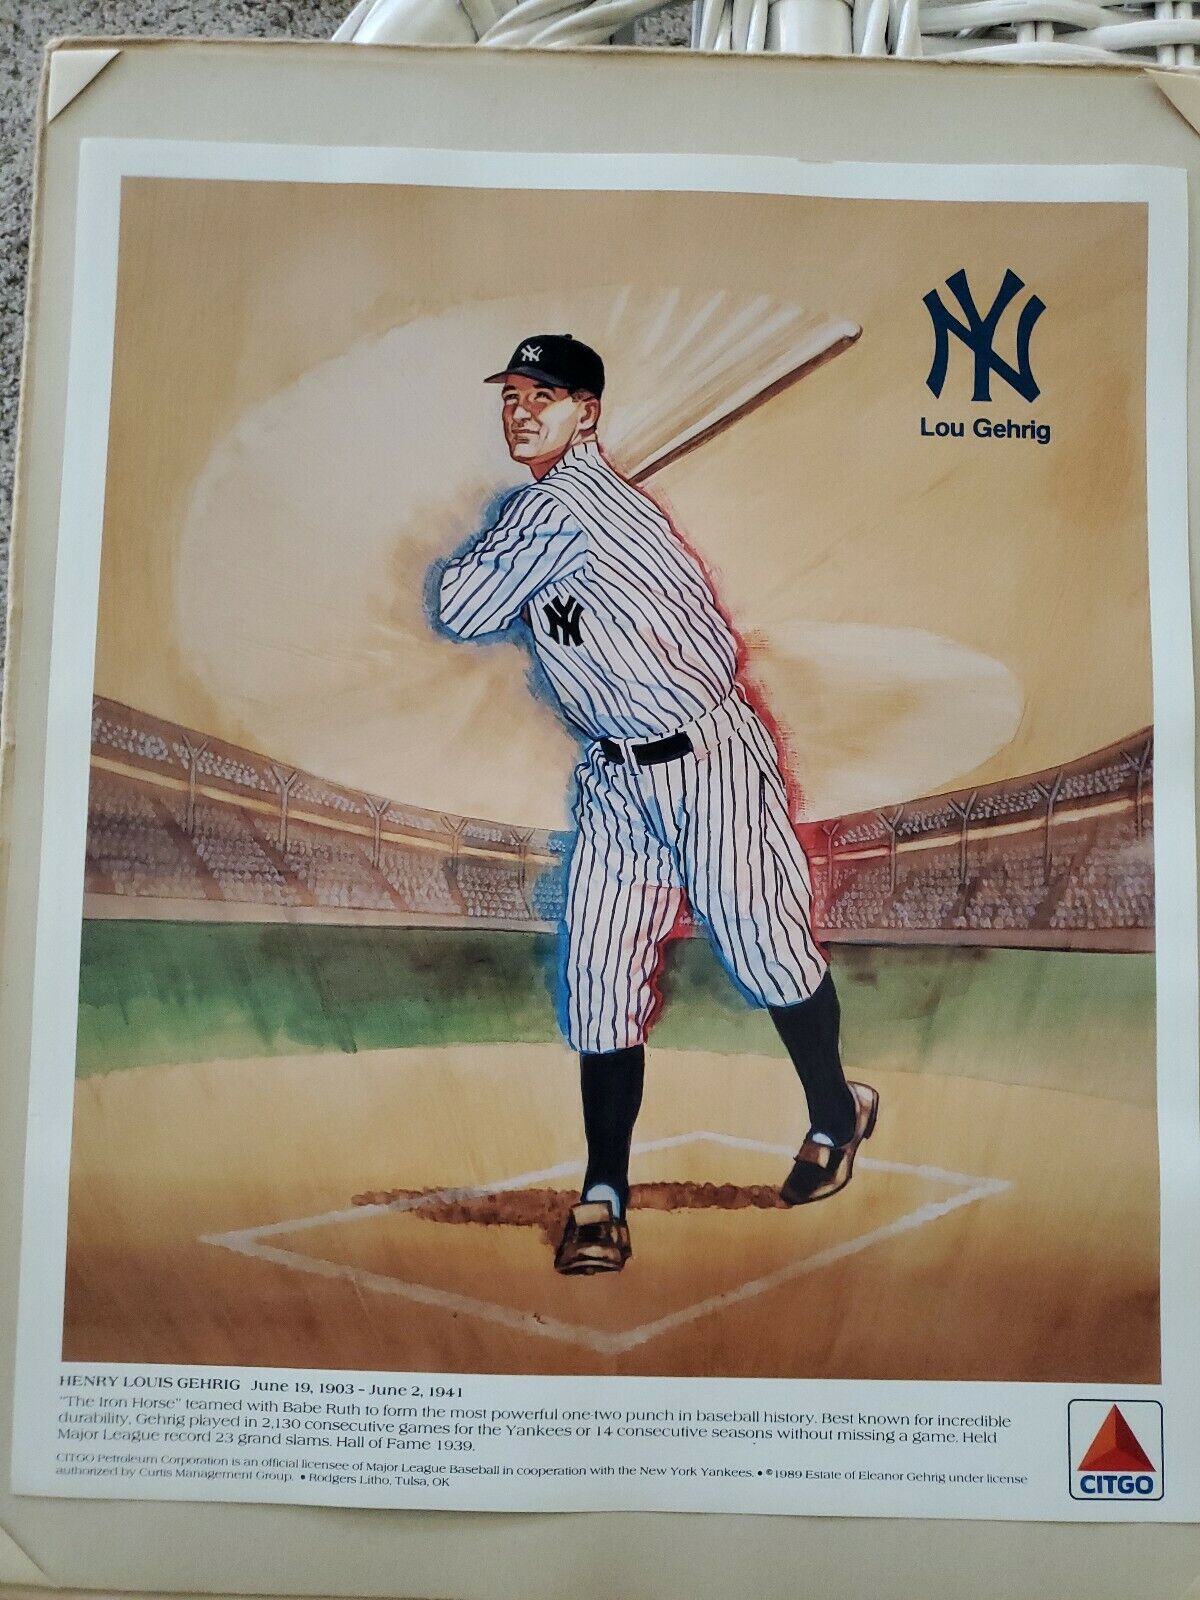 VINTAGE New York YANKEES Citgo ads (4) w #/ BABE RUTH LOU GEHRIG and more! LOT  Без бренда - фотография #2